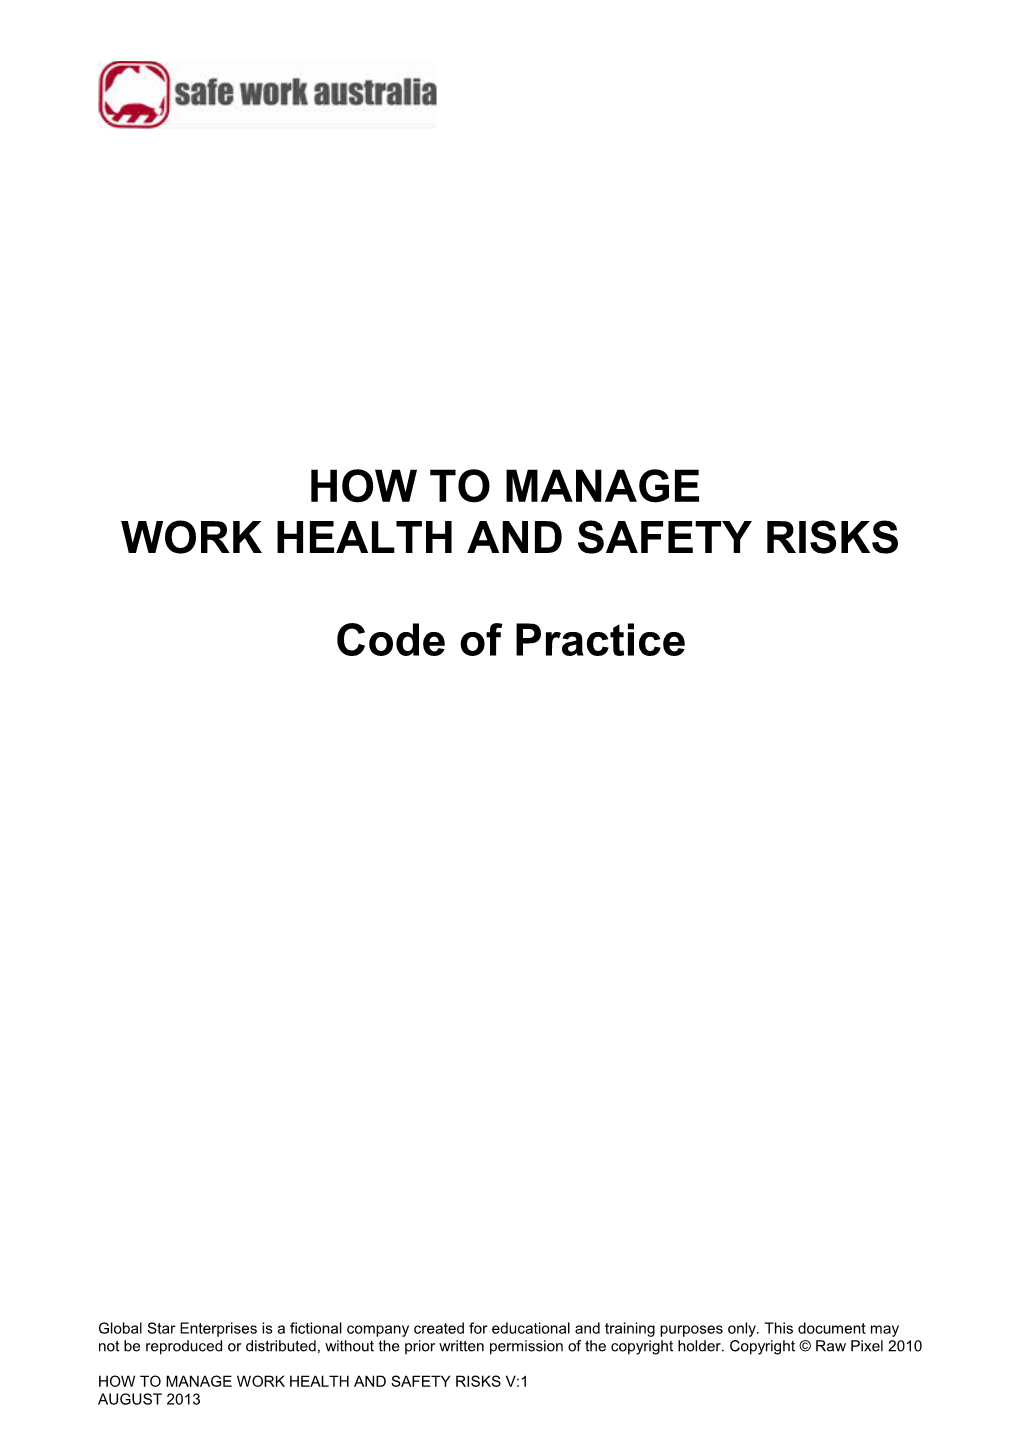 How to Manage Work Health and Safety Risks Code of Practice